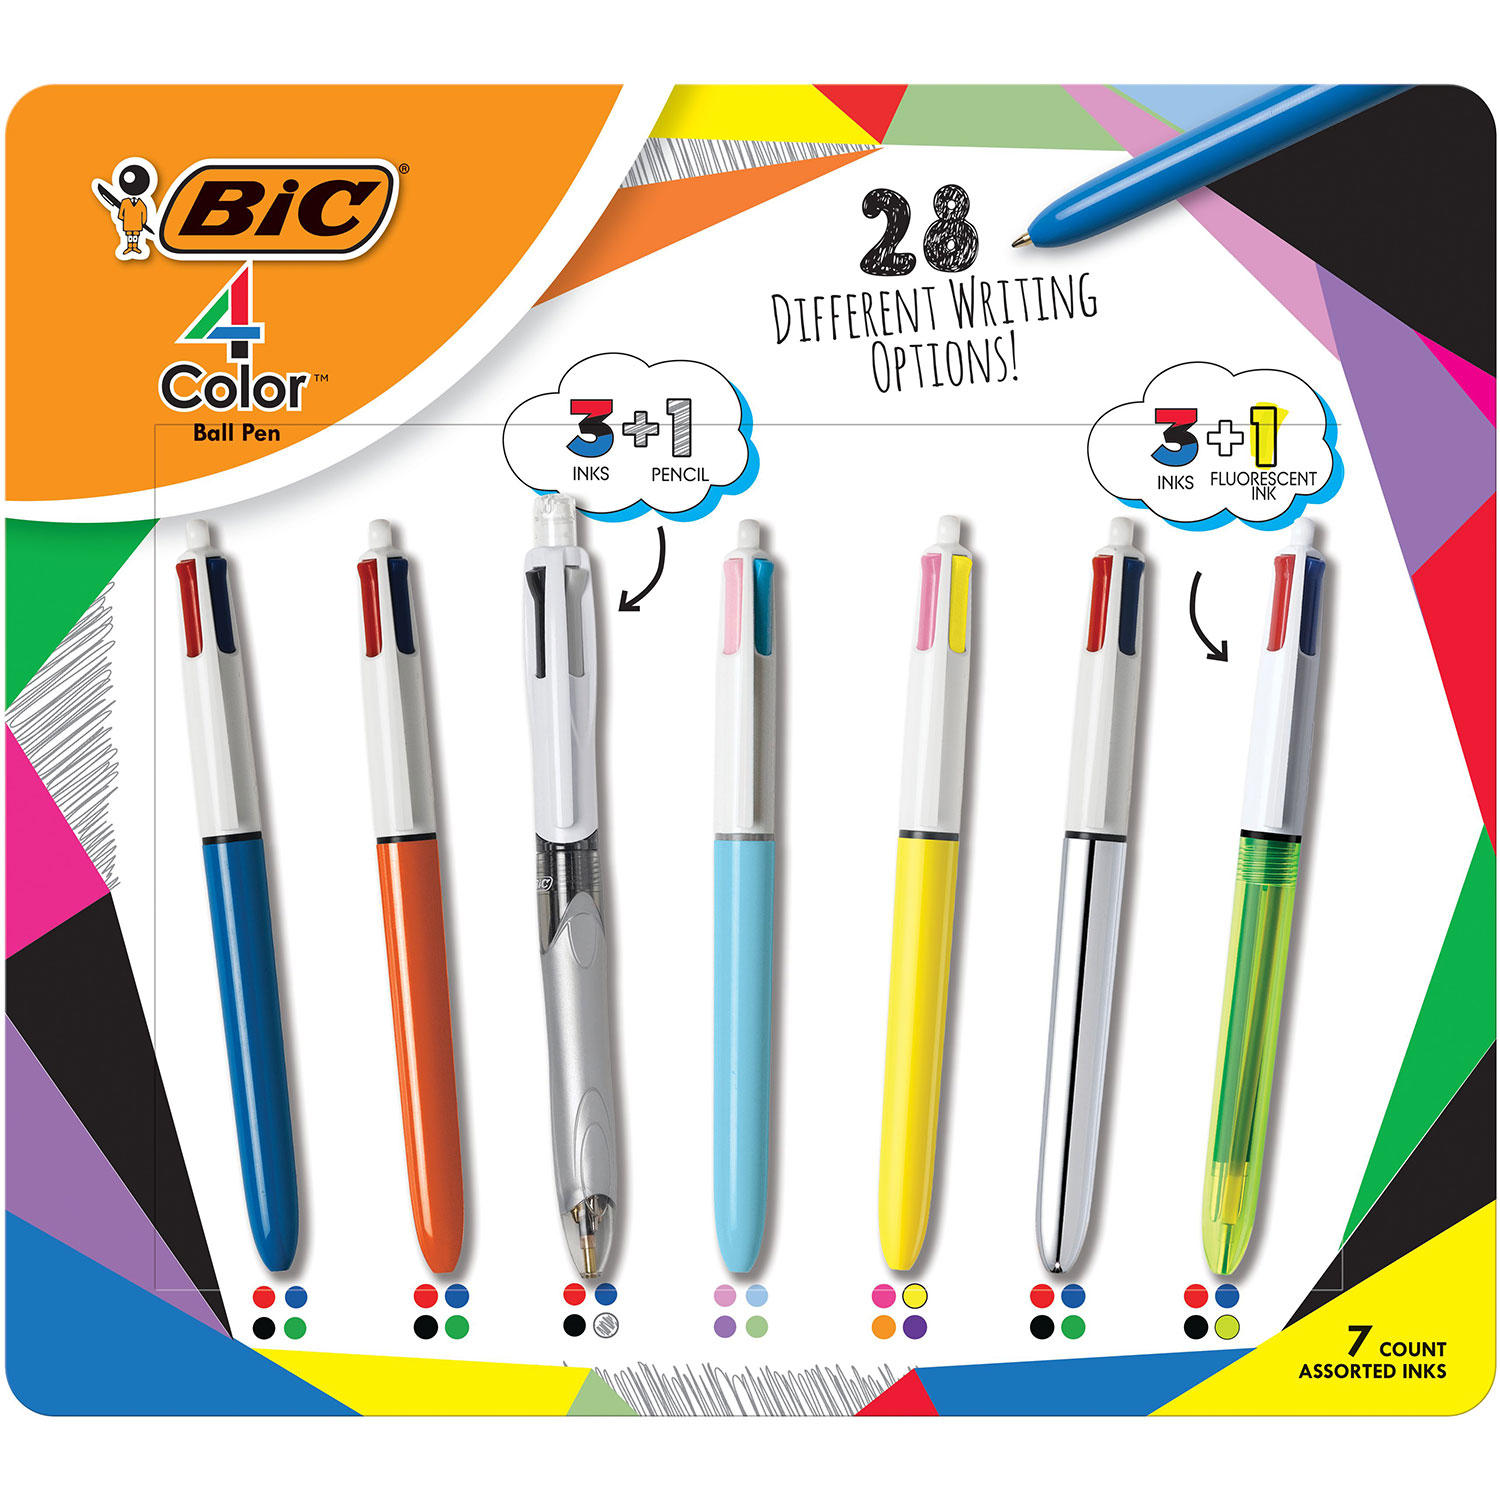 BIC 4-Color Retractable Ballpoint Pen, Med Pt. 1.0mm, Variety (7 Count)